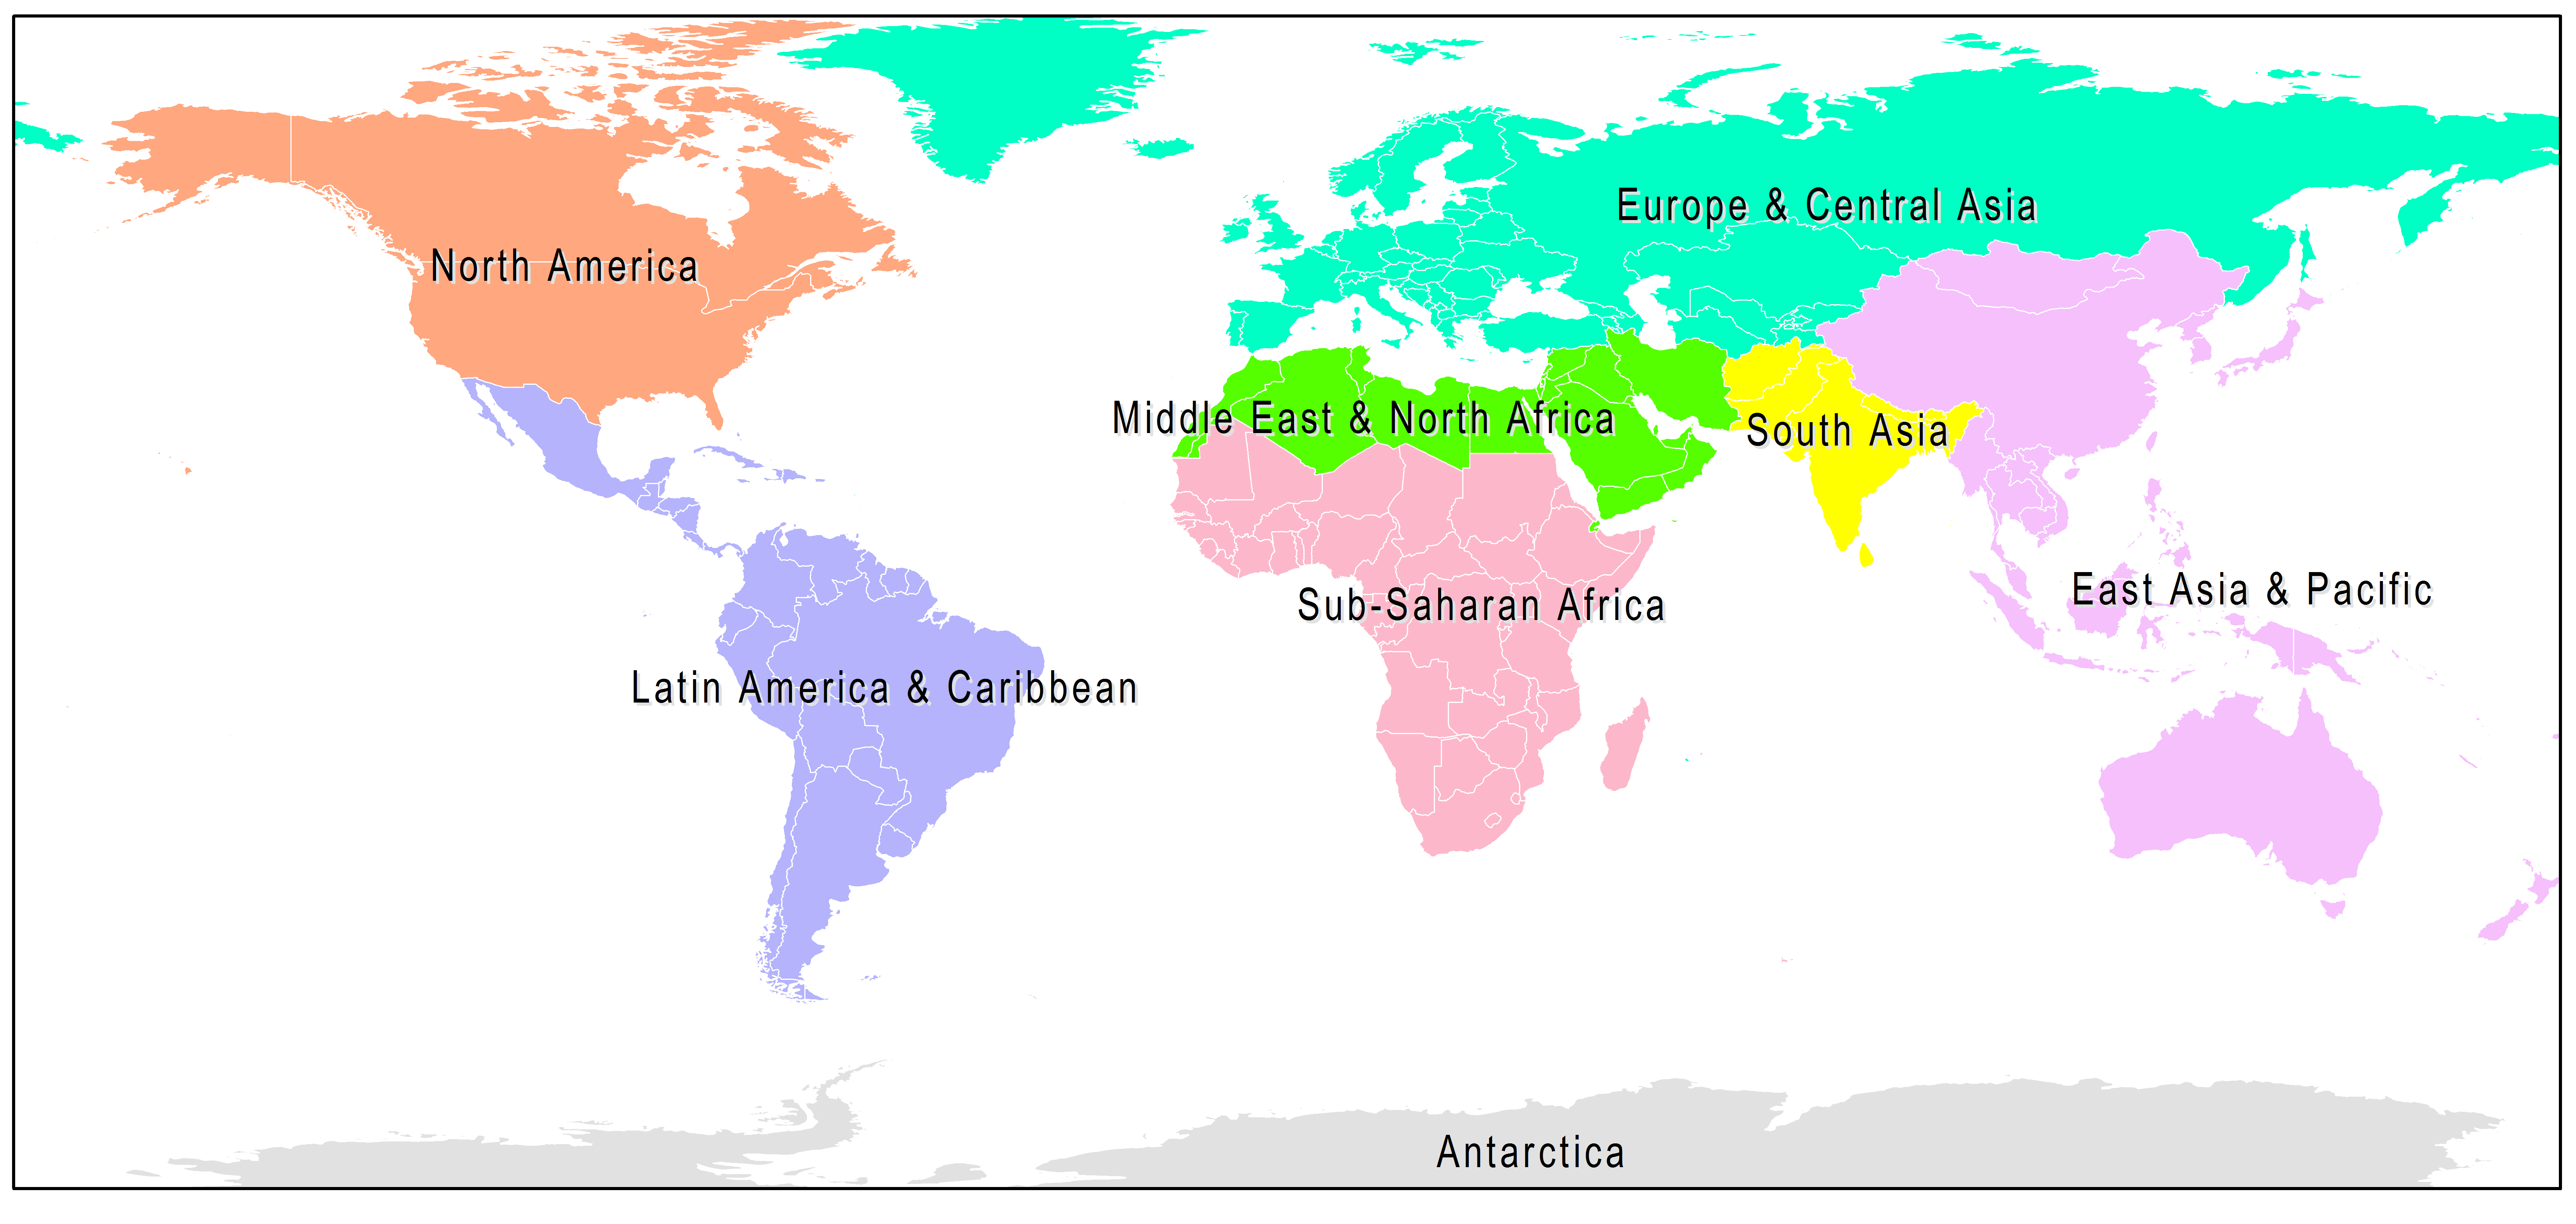 regions of the world